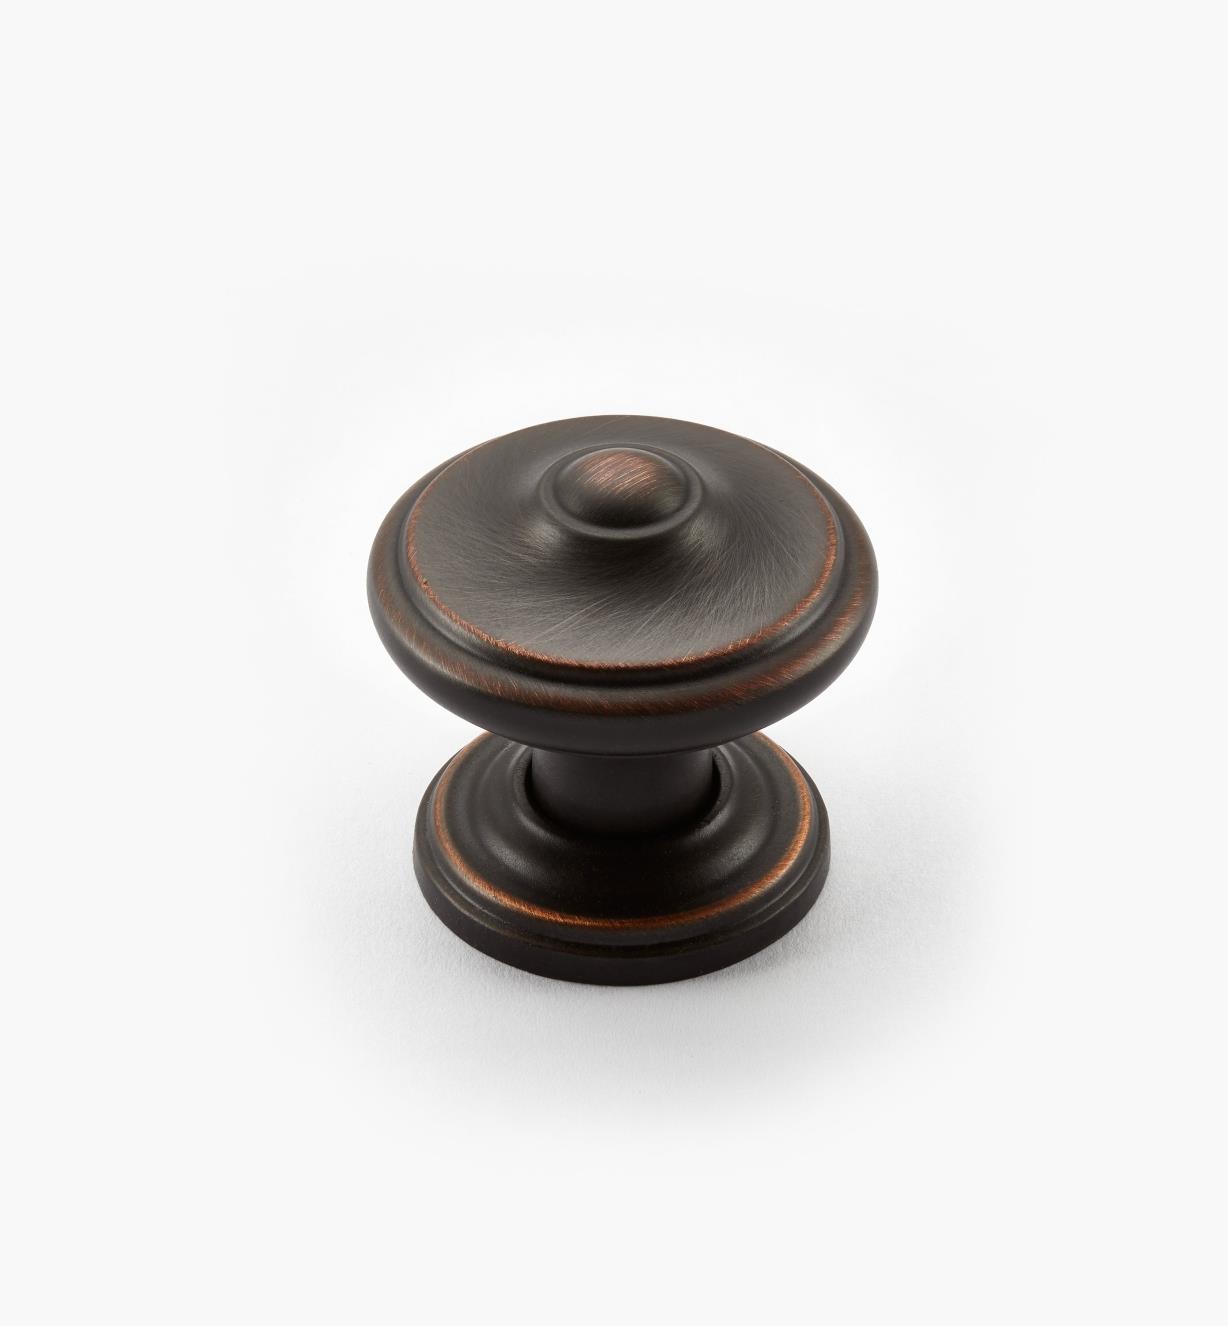 02A2241 - Revitalize ORB 1 1/4" Peaked Round Knob, each